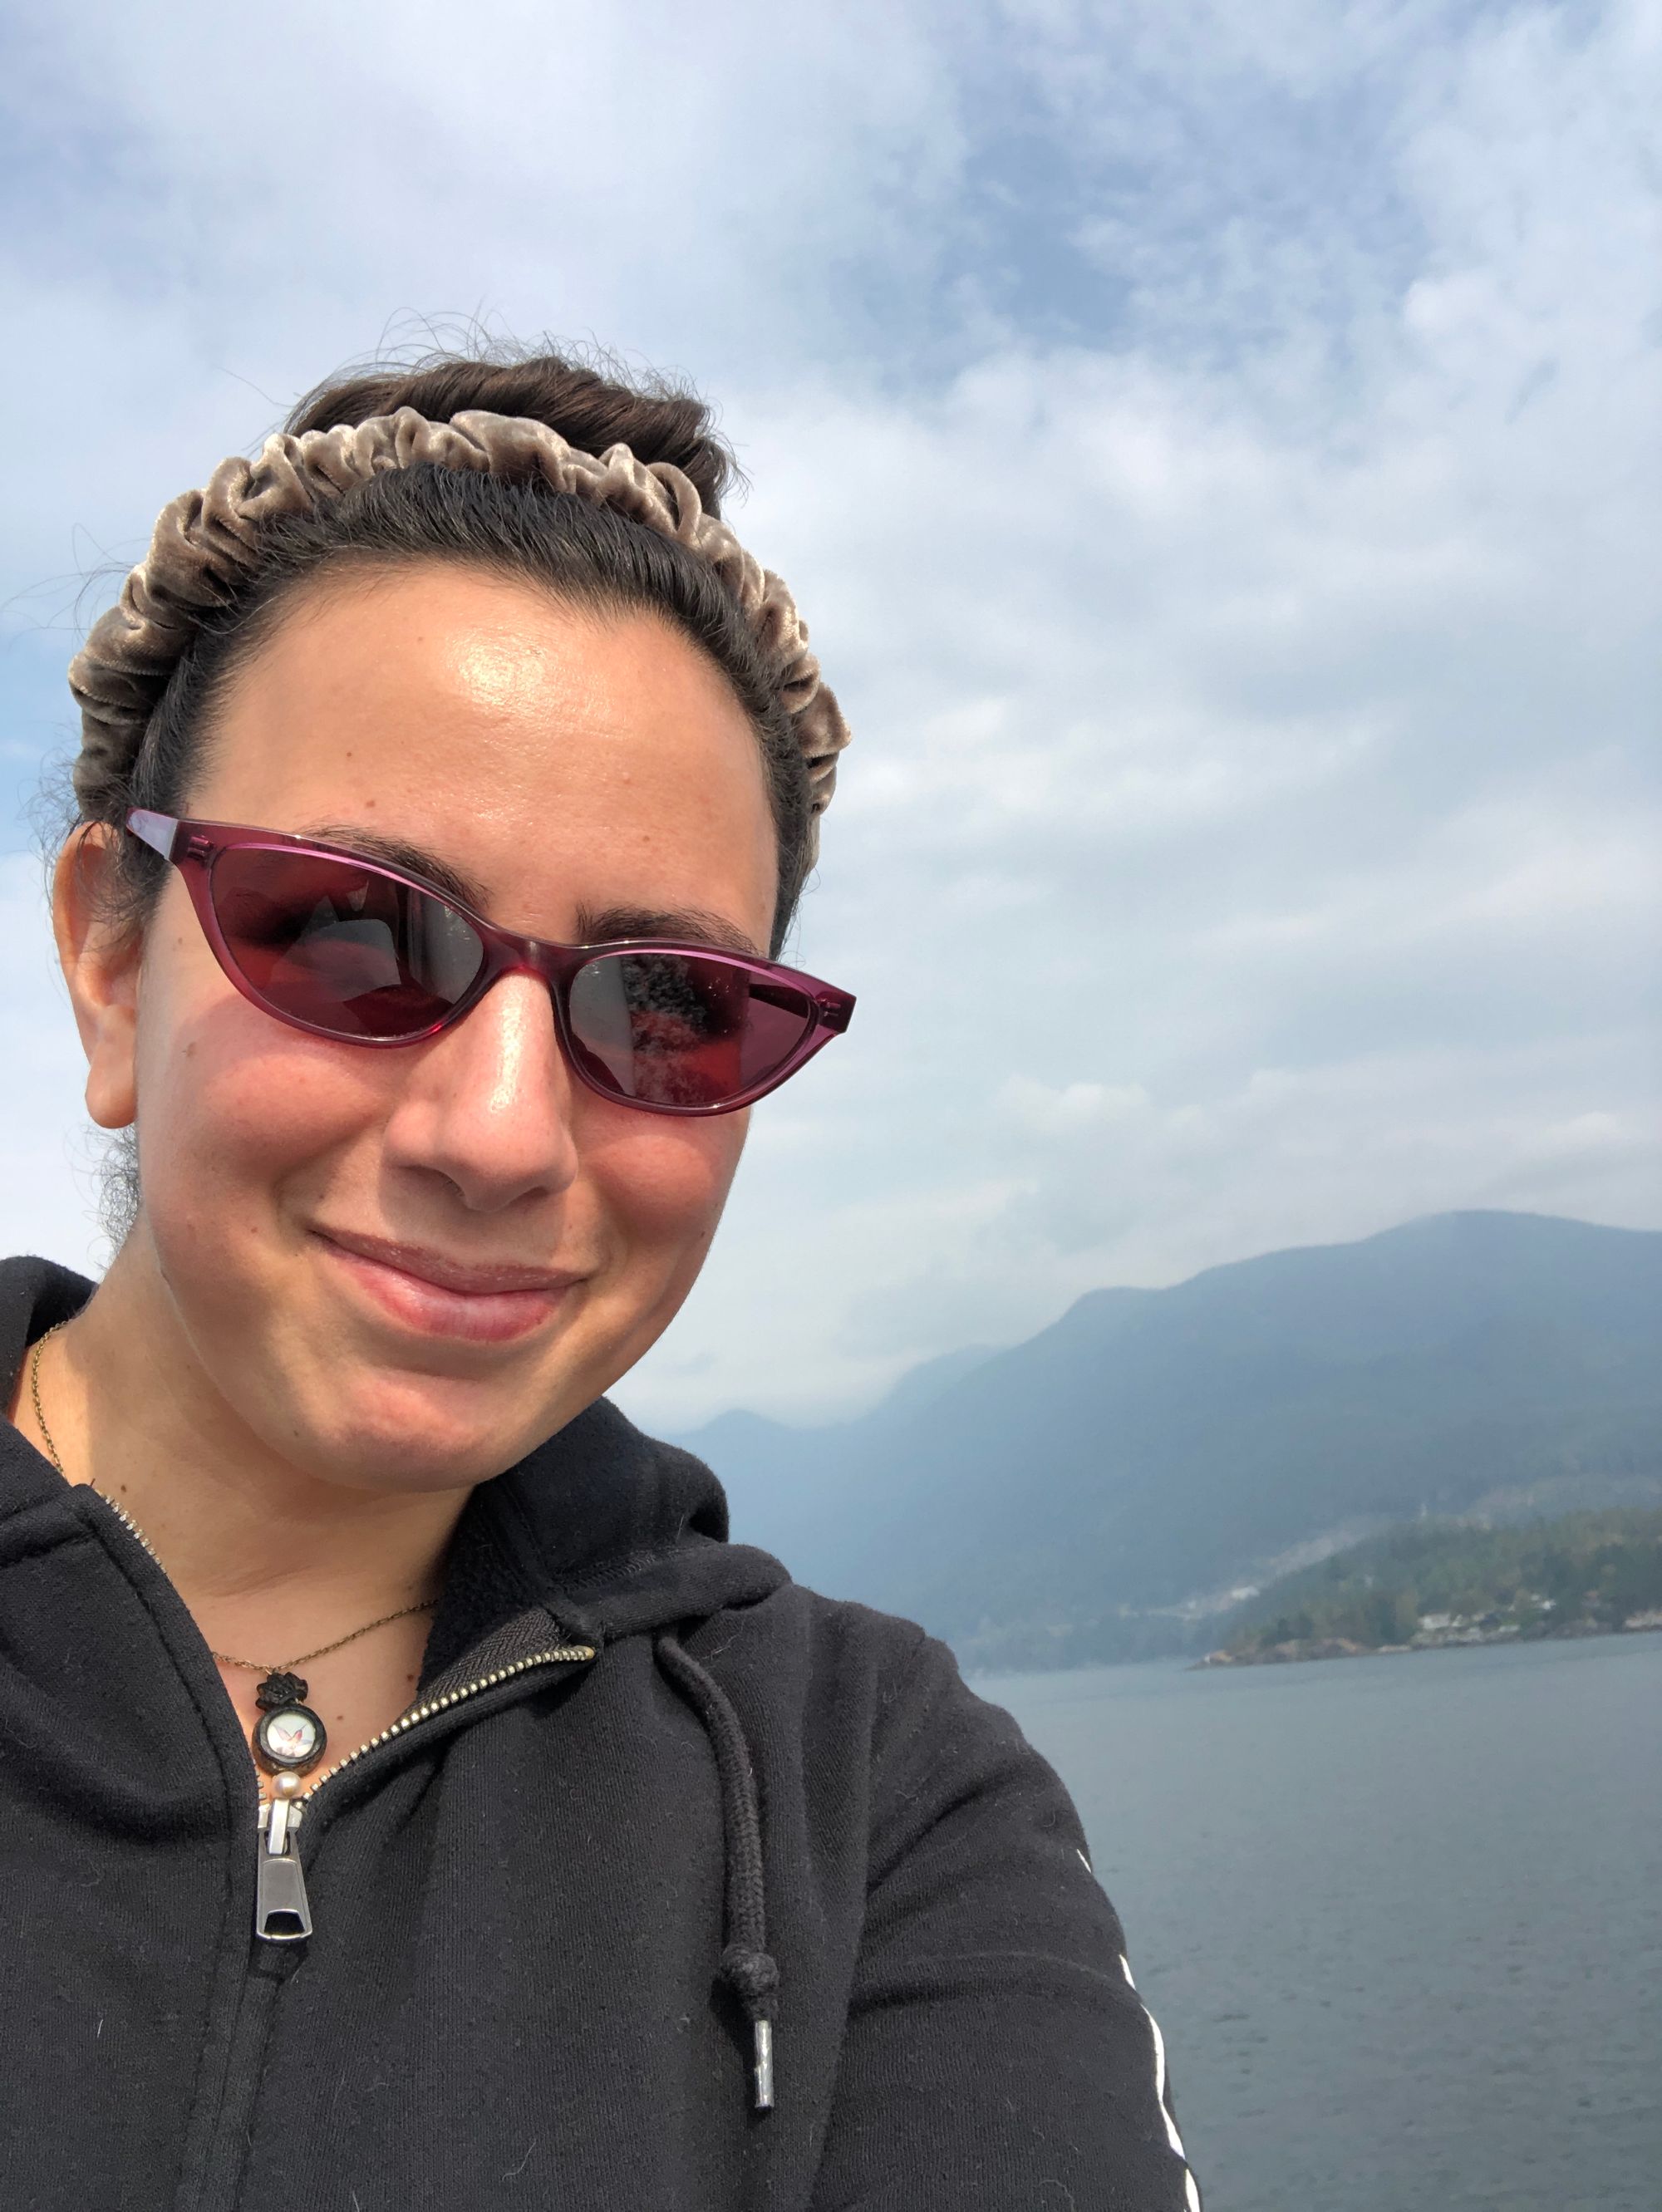 Selfie from a ferry, in which I'm wearing sunglasses and a scrunched velvet headband, with water and mountains behind me. 